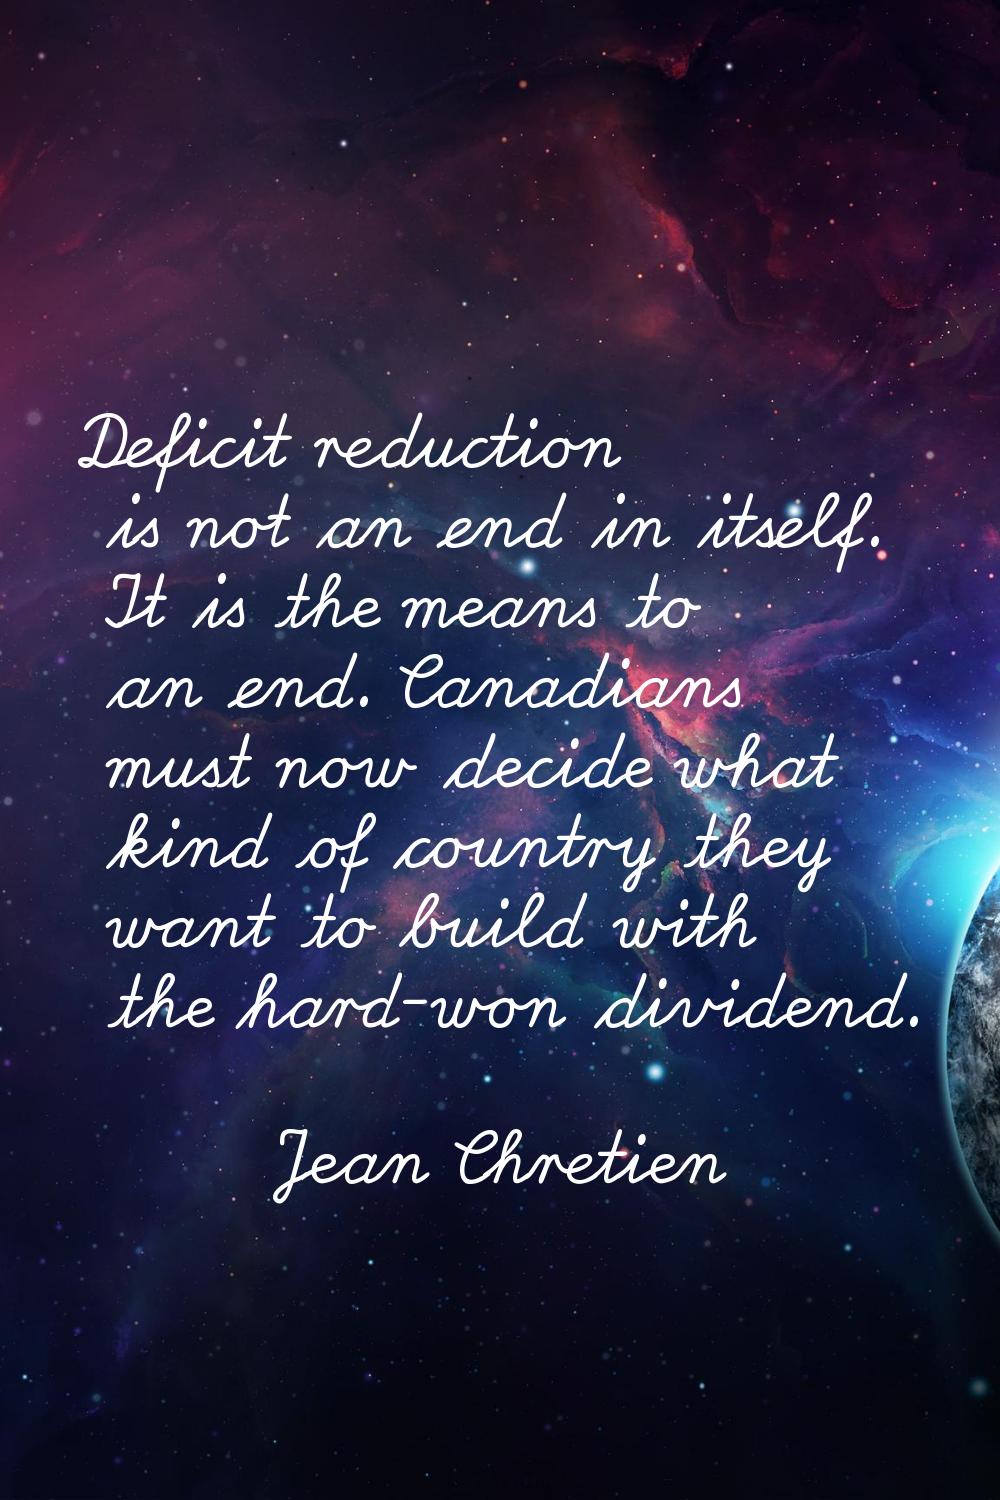 Deficit reduction is not an end in itself. It is the means to an end. Canadians must now decide wha